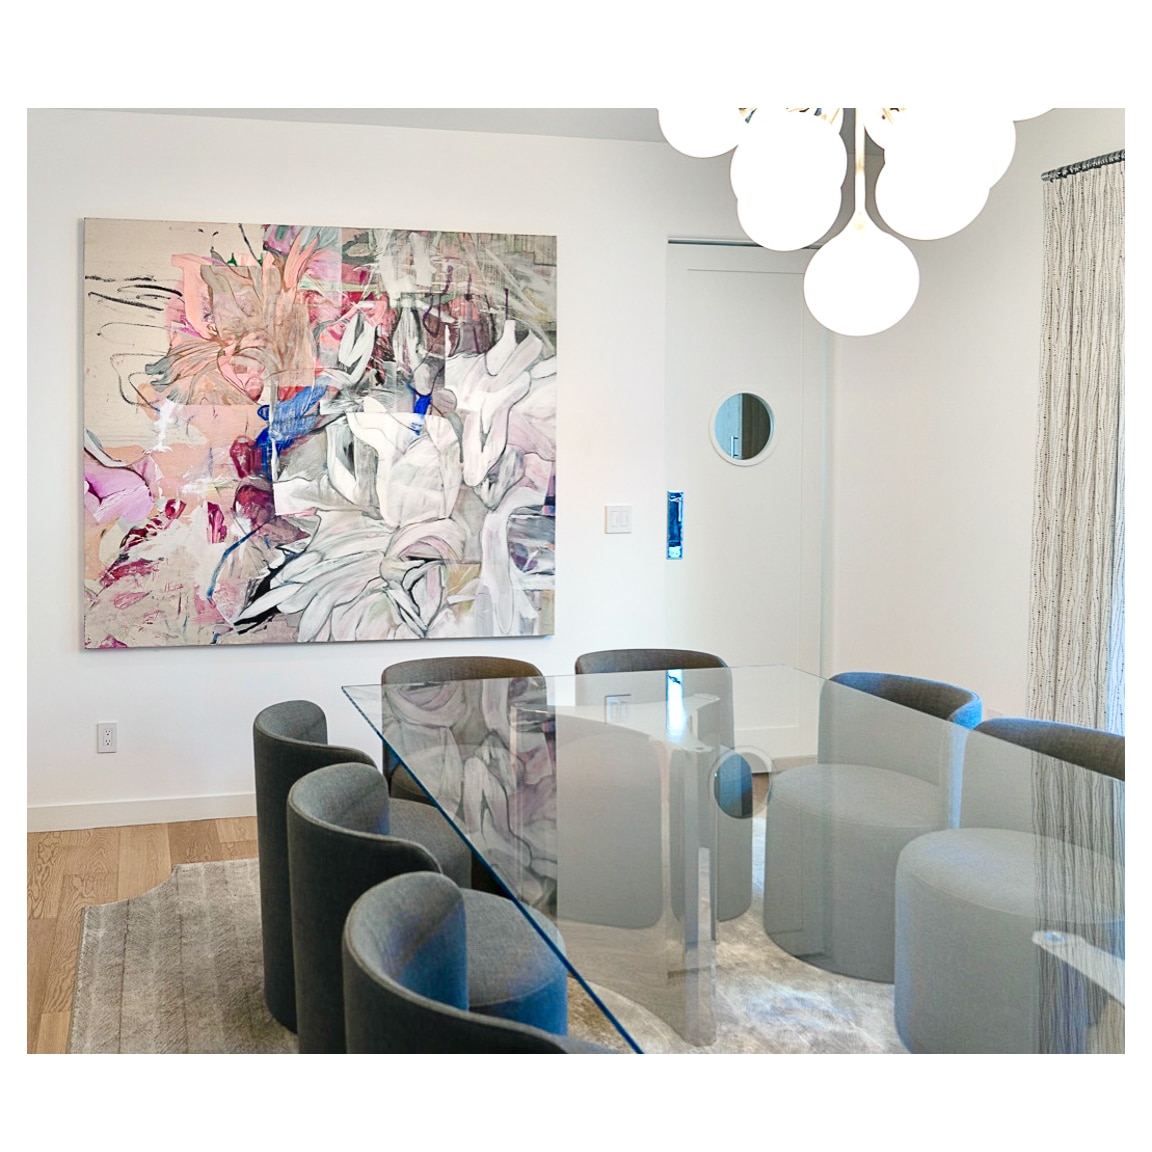 Large light urban abstract expressionism painting by Los Angeles artist Laura Letchinger installed PLACE ig